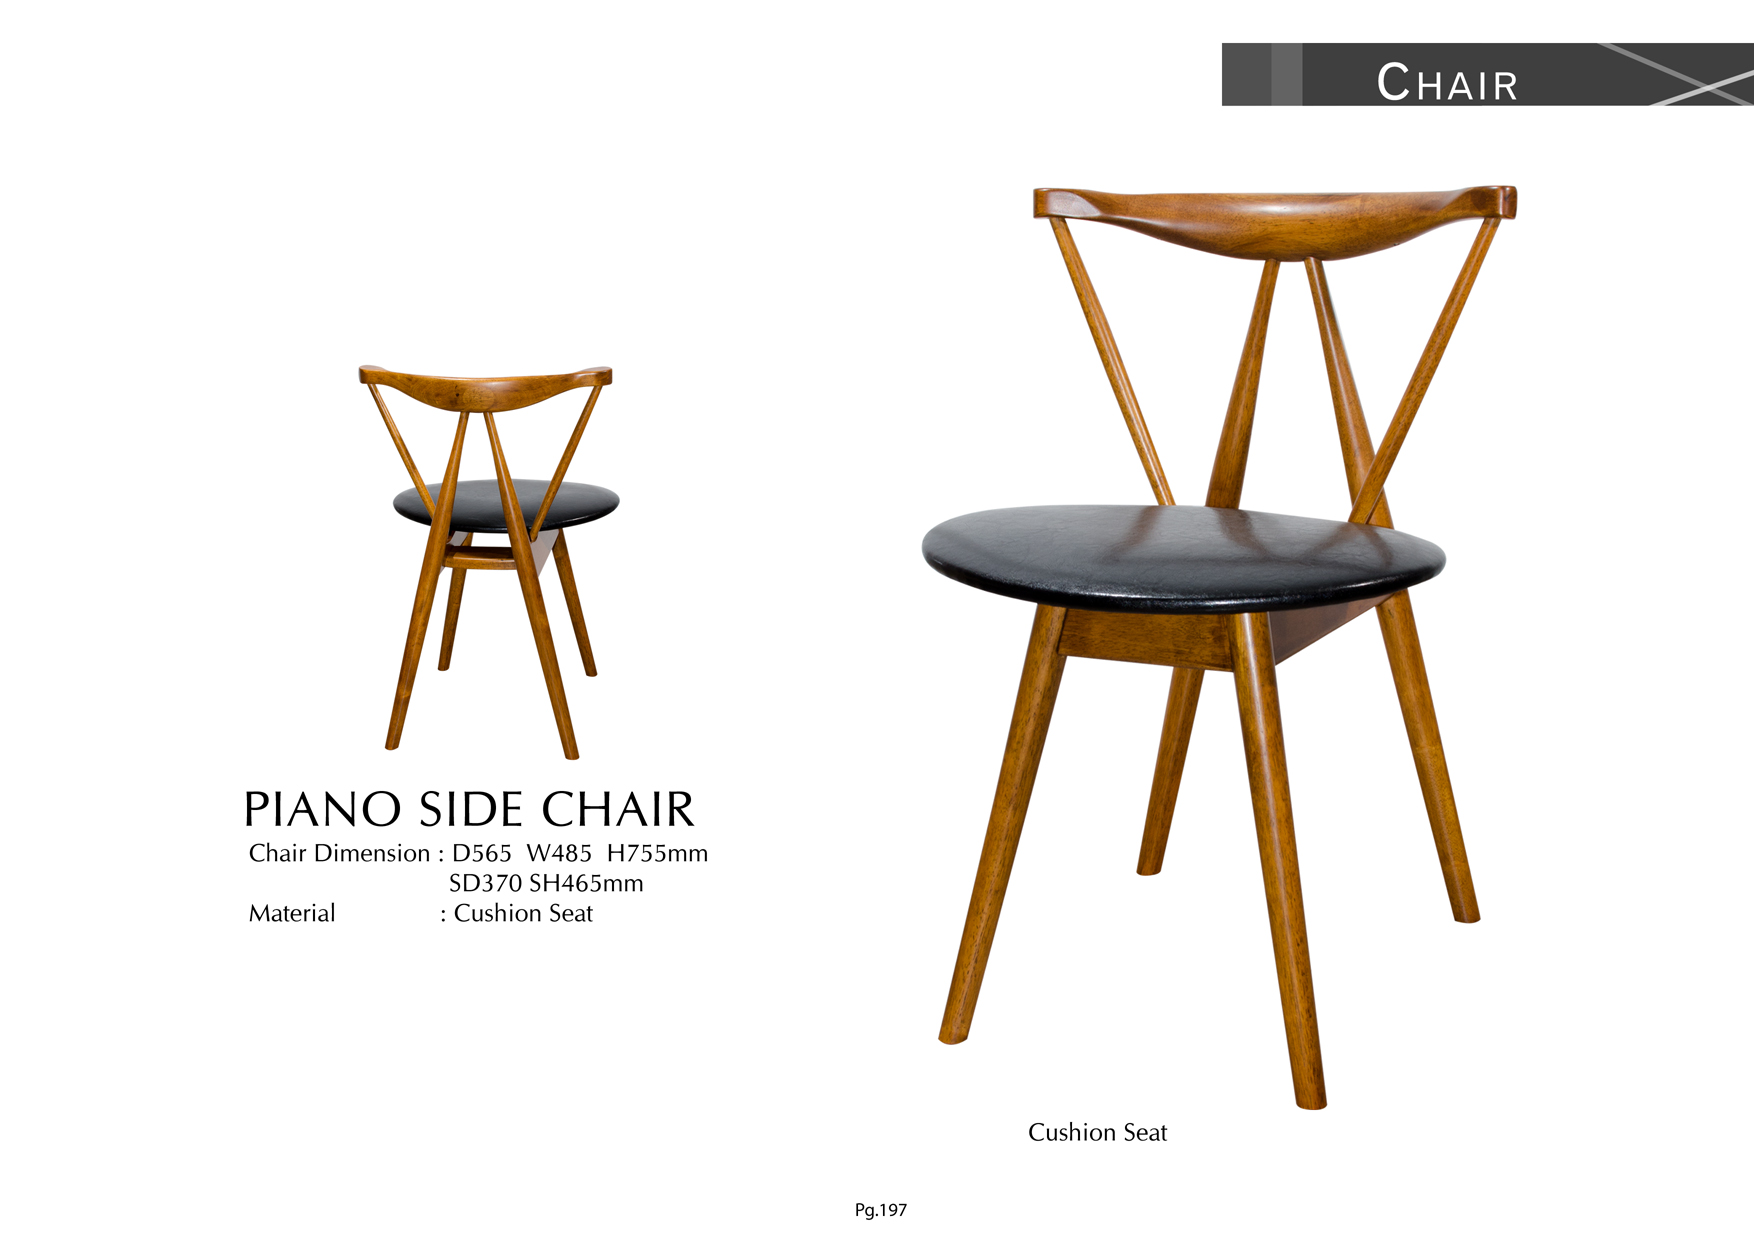 Product: PG197. PIANO SIDE CHAIR